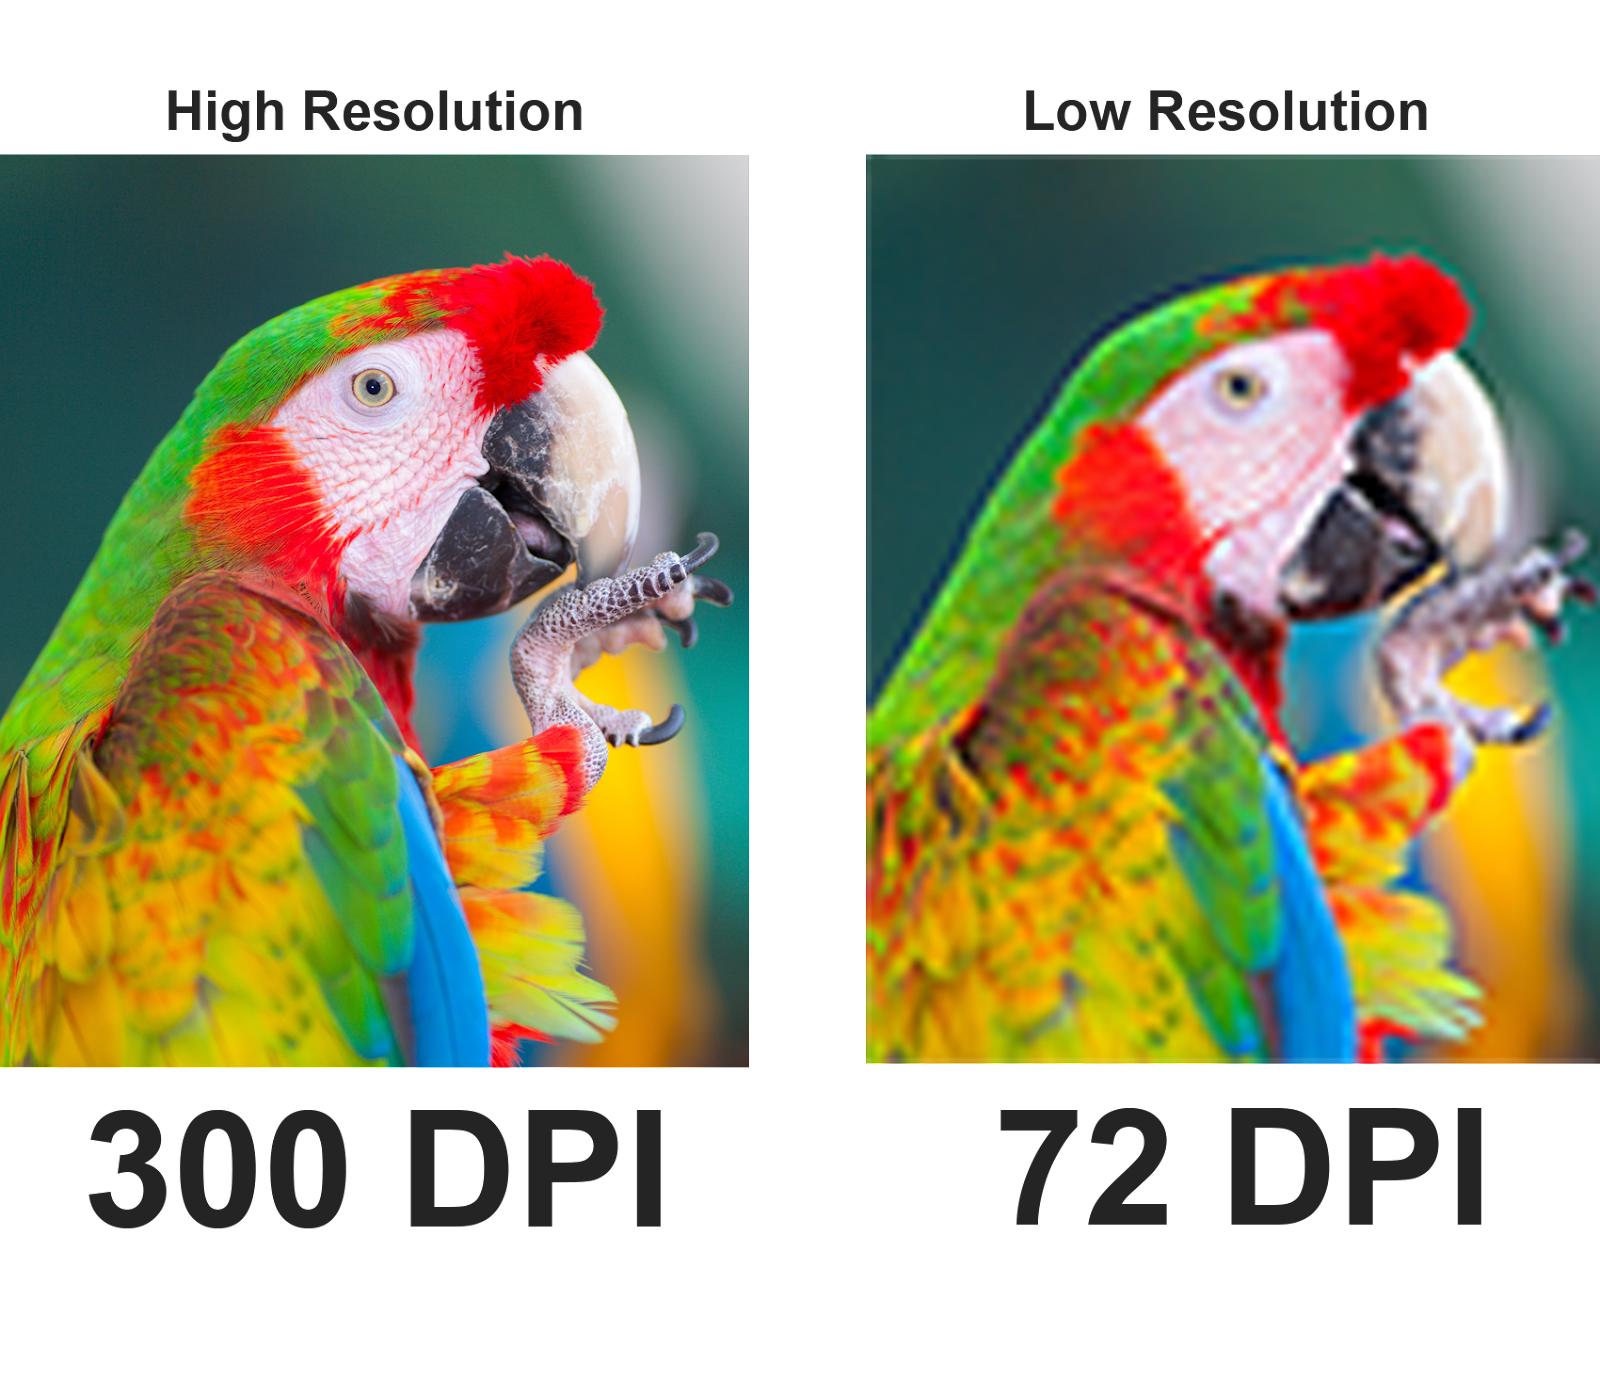 A picture of a parrot with a DPI of 300 and 72